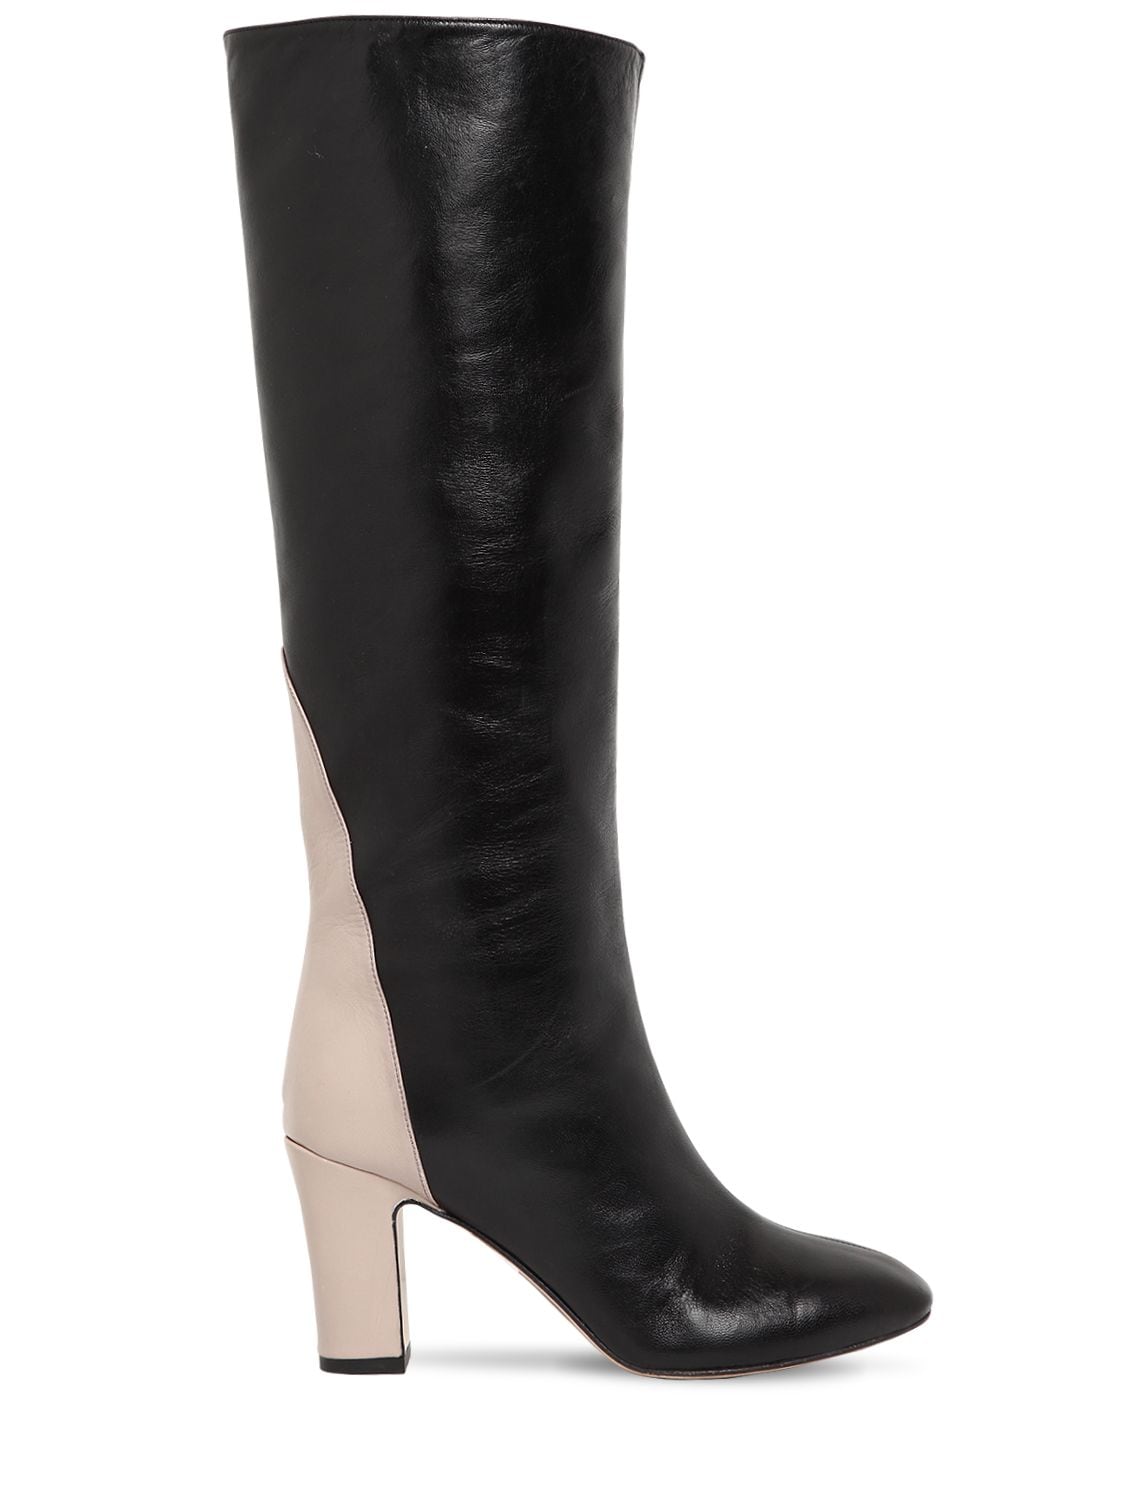 GIA COUTURE 80MM PORTORICO LEATHER TALL BOOTS,68IIAR006-MDFBNA2